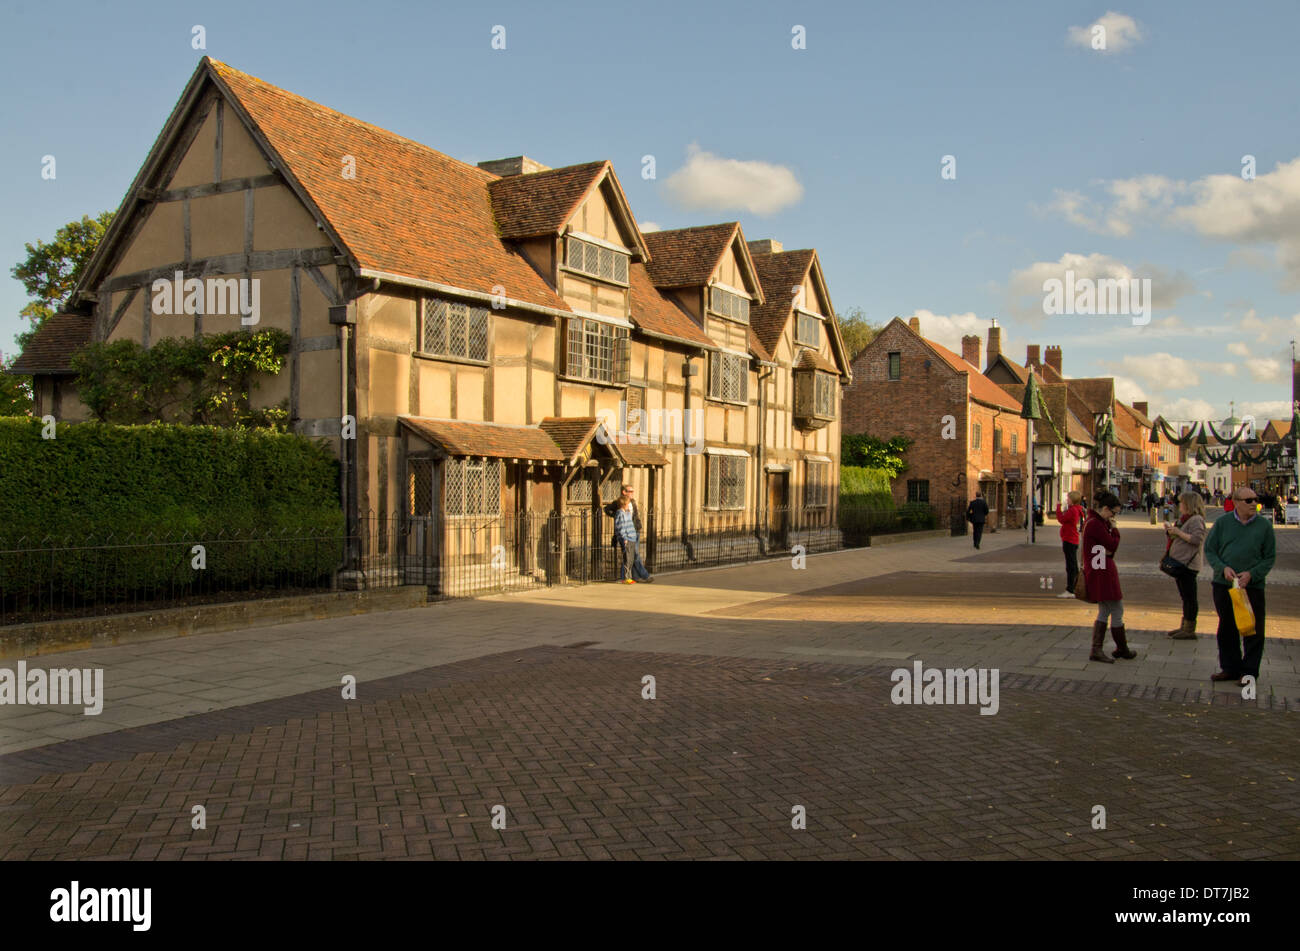 Shakespeare’s birthplace trust half timbered house Stock Photo